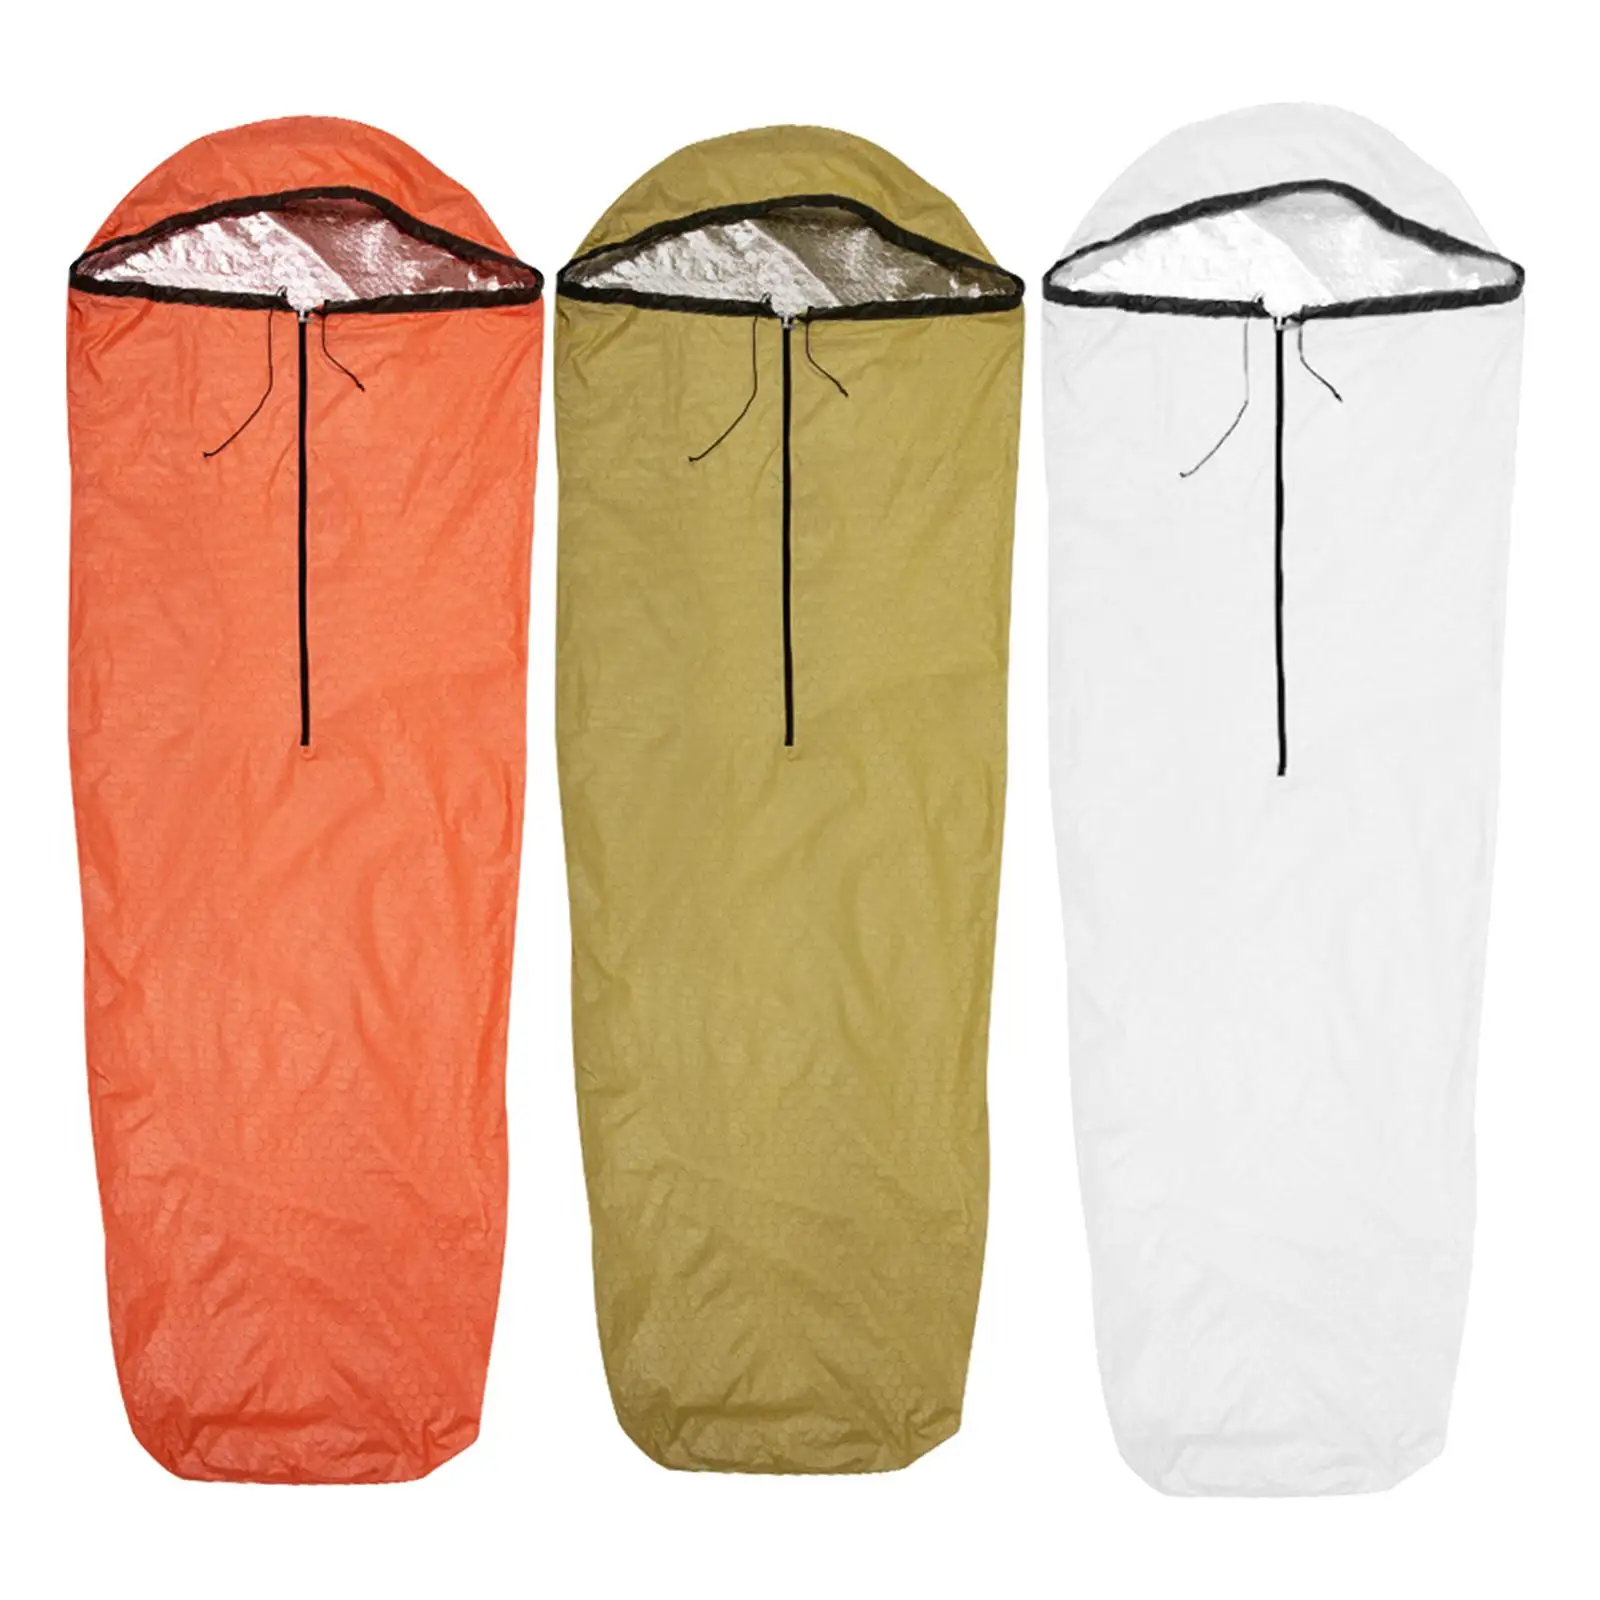 Emergency Sleeping Bag, Multi Purpose Thermal Insulation Bag Reusable Bag for Outdoor Camping Activities Adults